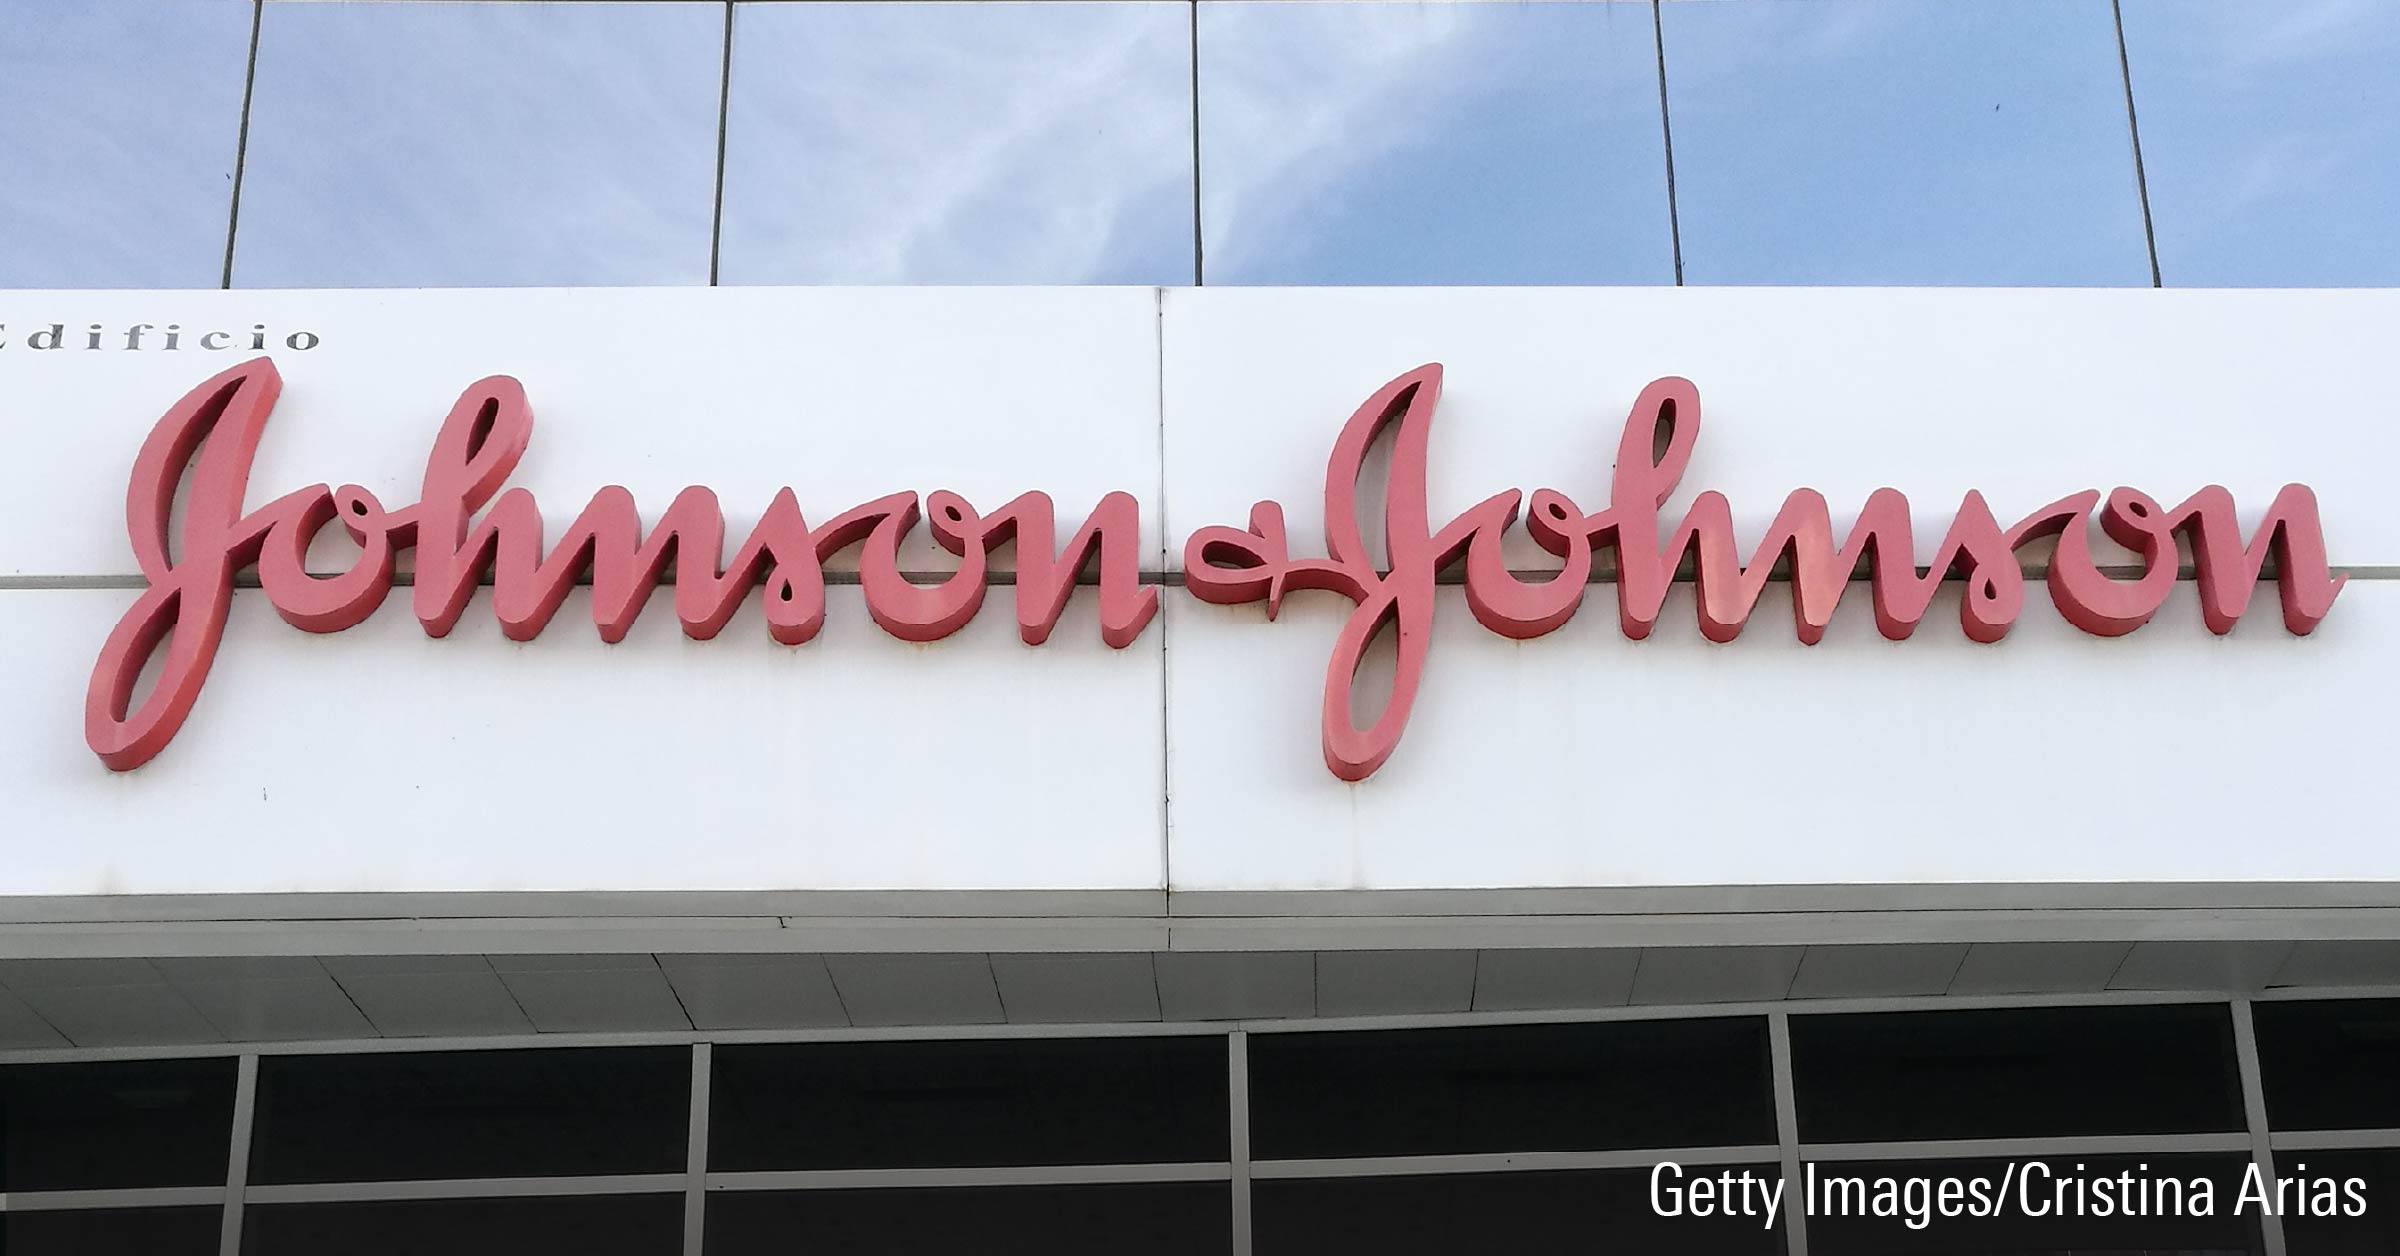 Image of a sign of the Johnson & Johnson logo.